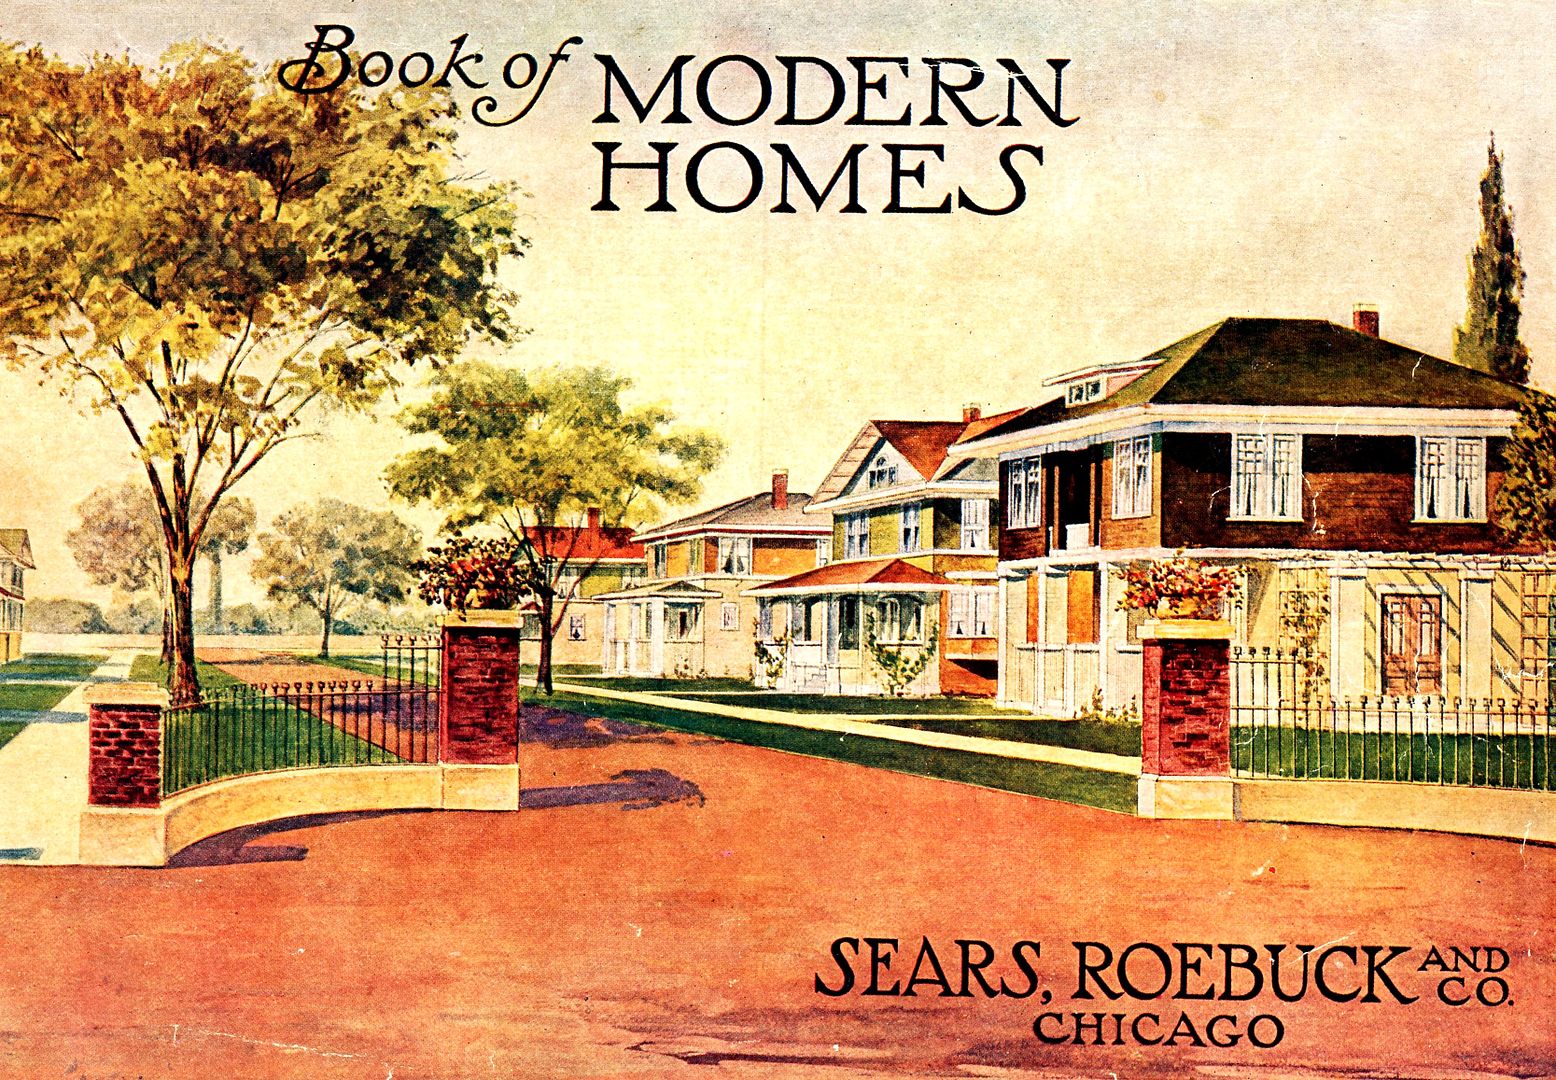 The 1909 Sears Modern Homes catalog is probably the rarest of these catalogs. Its in this catalog that I found Dr. M